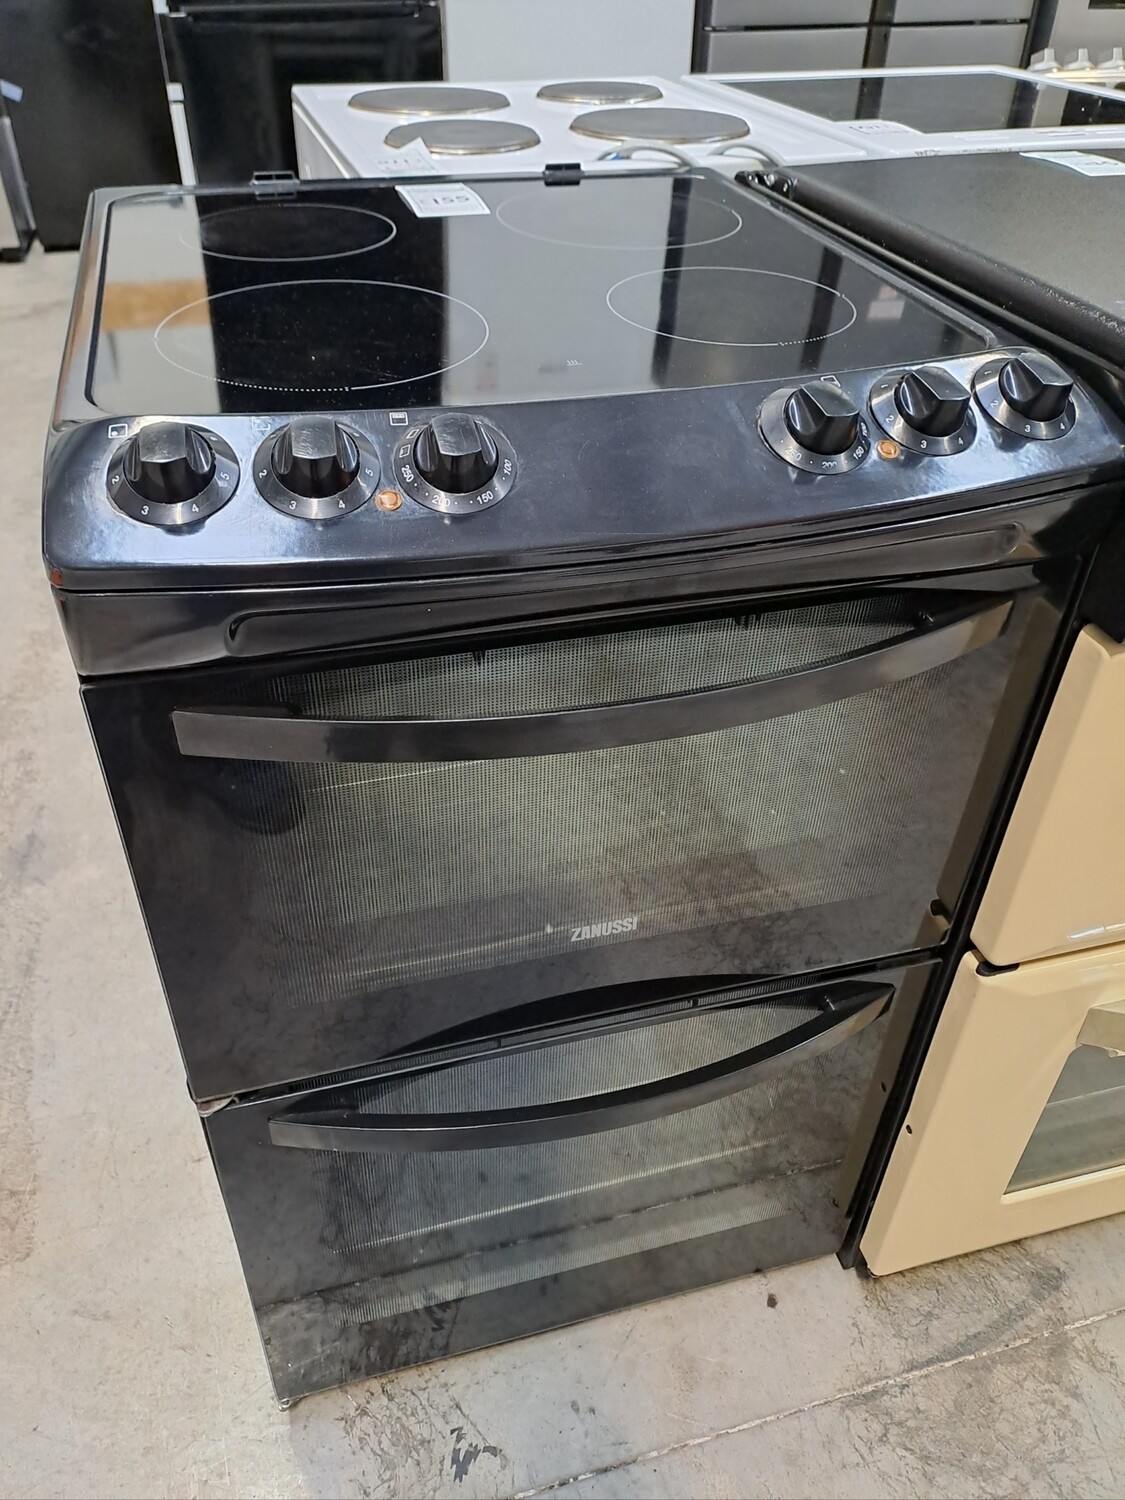 Zanussi ZCV46000BA 55cm Electric cooker Twin Cavity Double Oven Ceramic Hob - Black  - Refurbished + 6 month guarantee. This item is located in our Whitby Road 